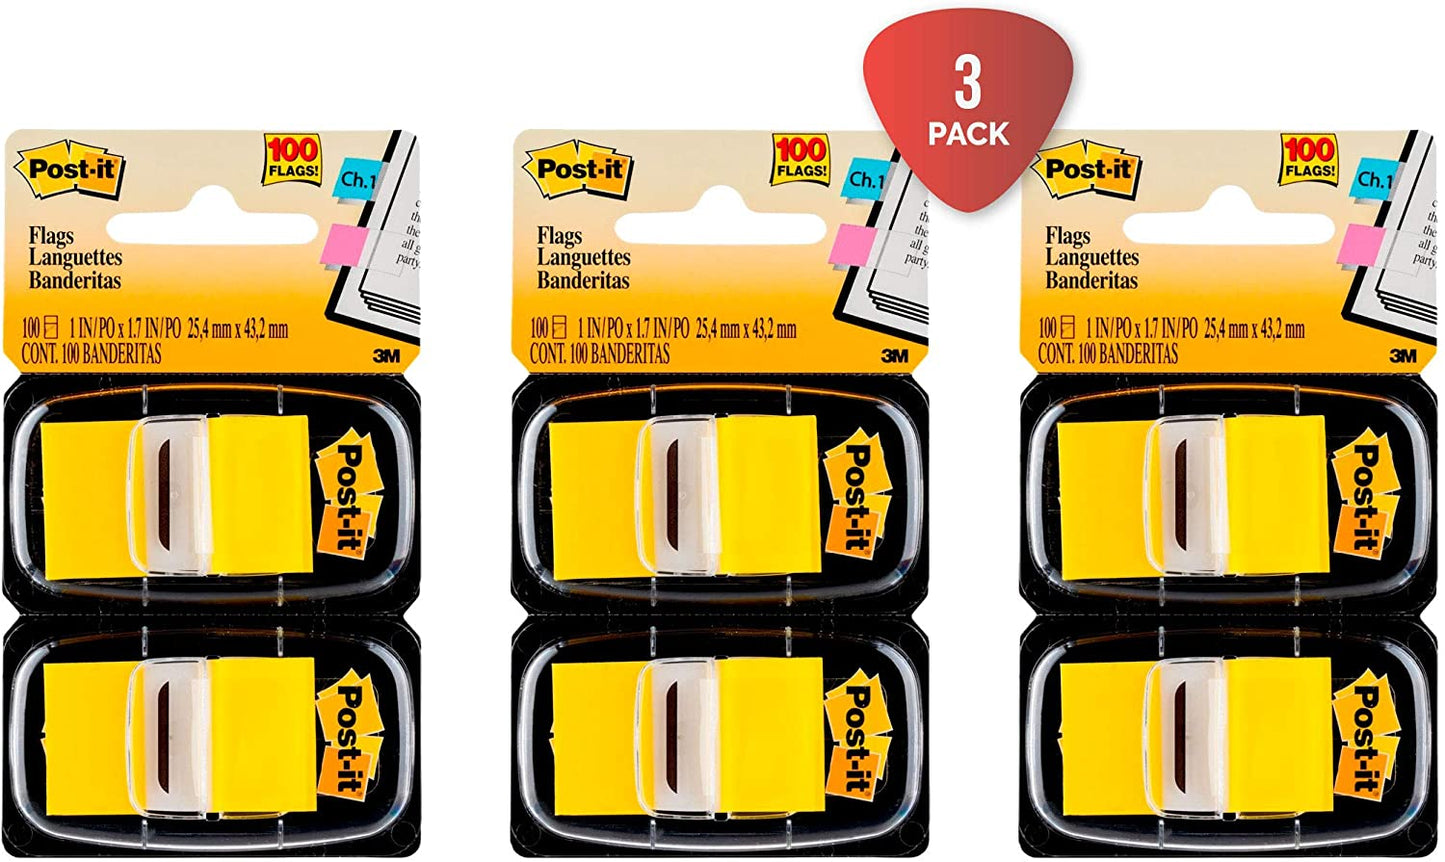 Post-it Standard Page Flags in Dispenser, Yellow, 1 in Wide, 300 Flags/Dispenser